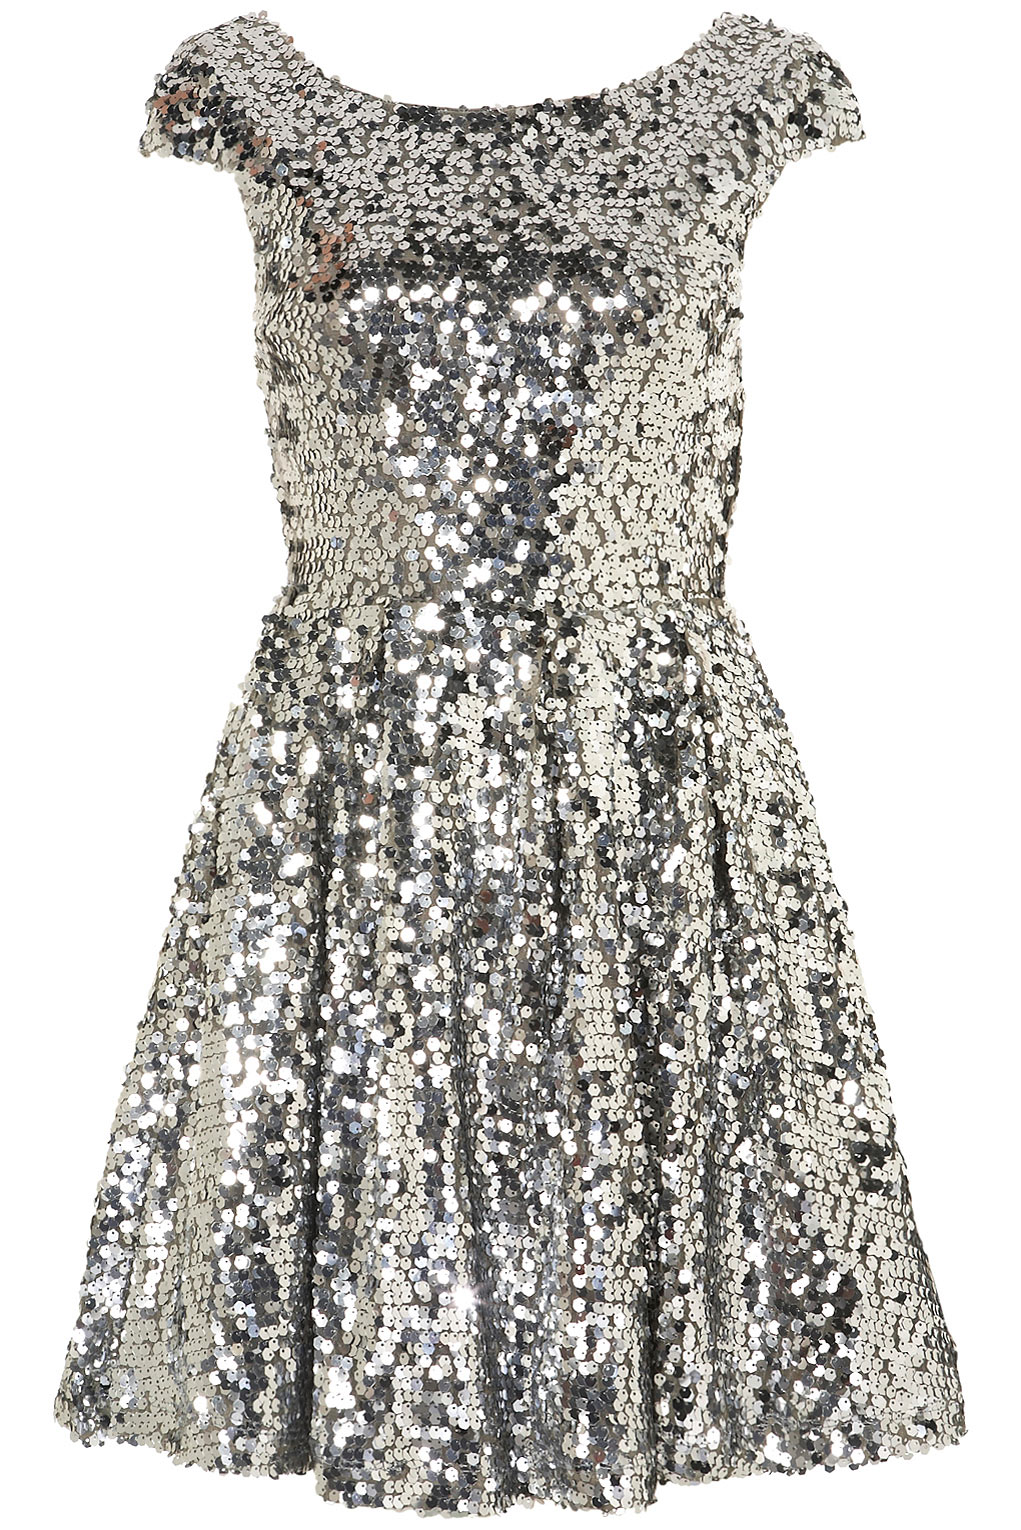 Silver And White Sequin Dress - Always In Fashion For All Occasions